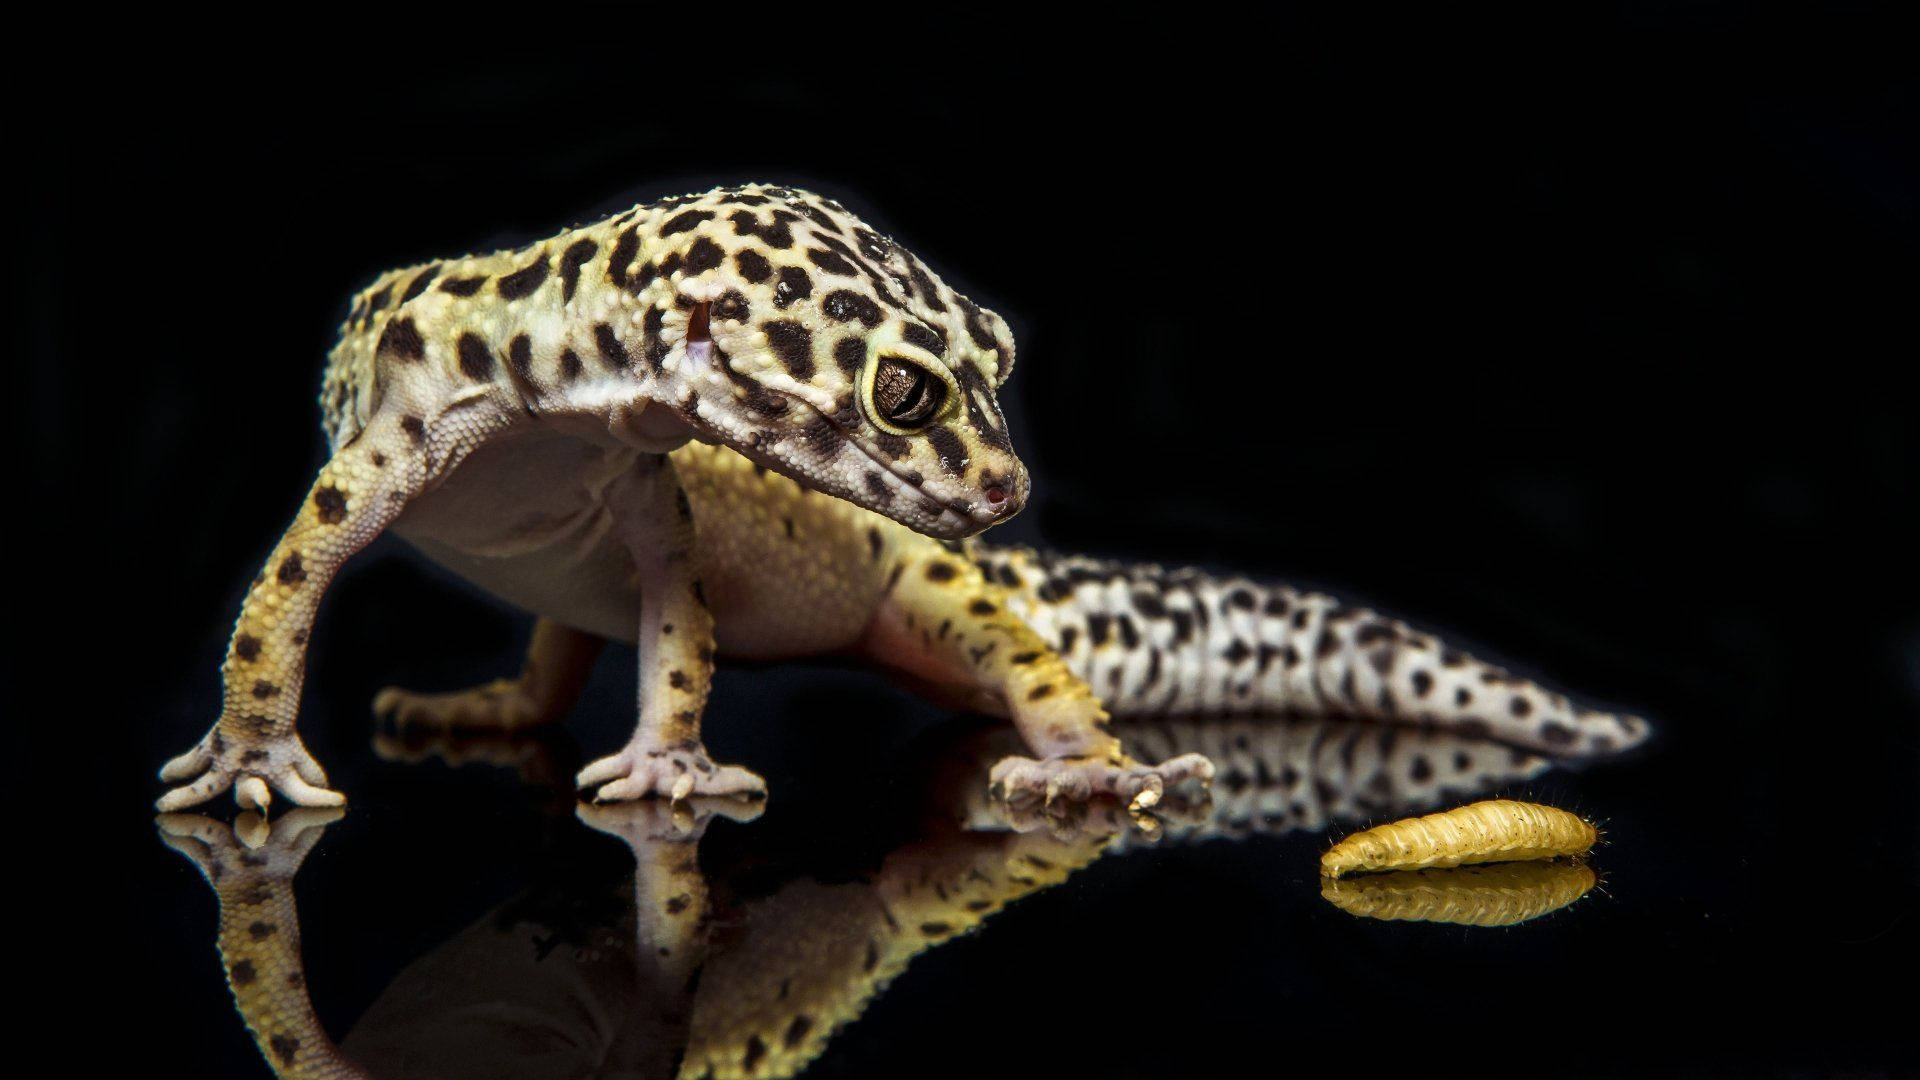 Black Spotted Gecko With Worm